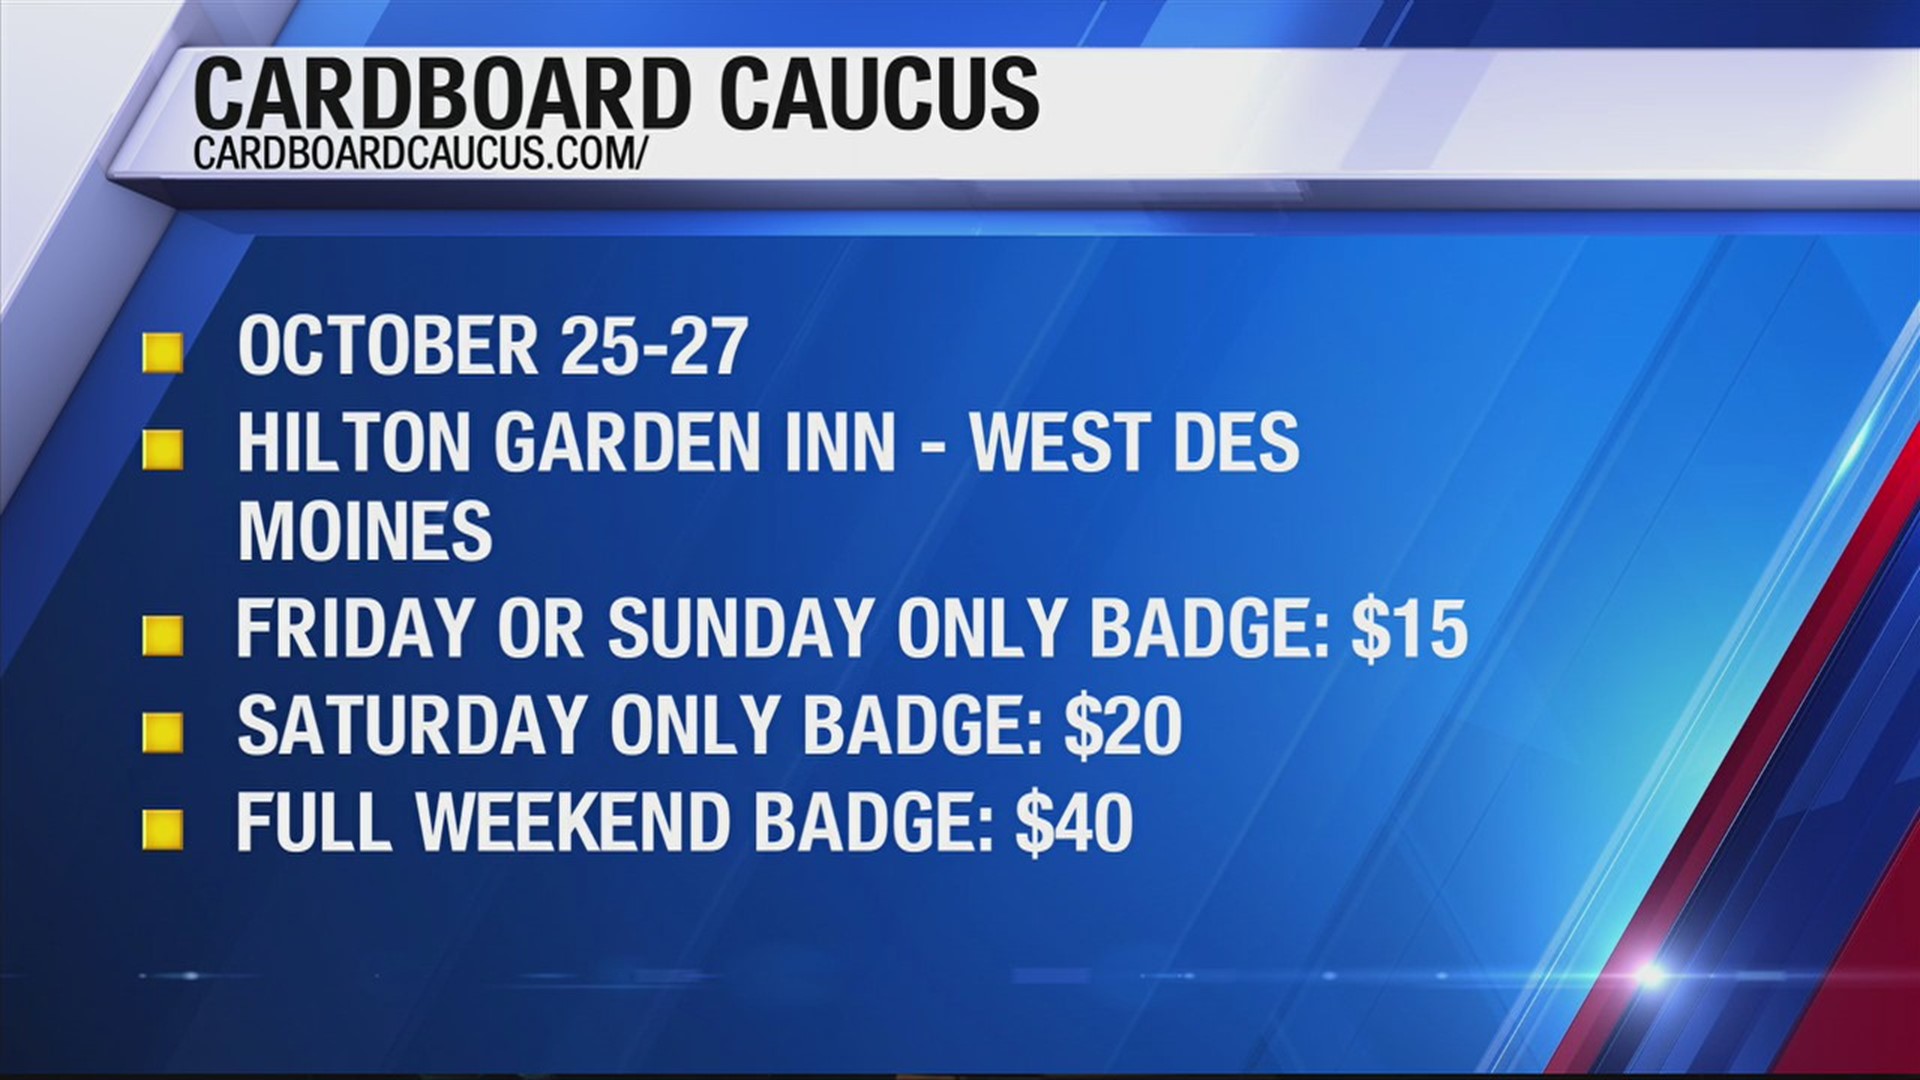 This weekend, you can help grow the tabletop gaming community at the inaugural Cardboard Caucus taking place in West Des Moines.